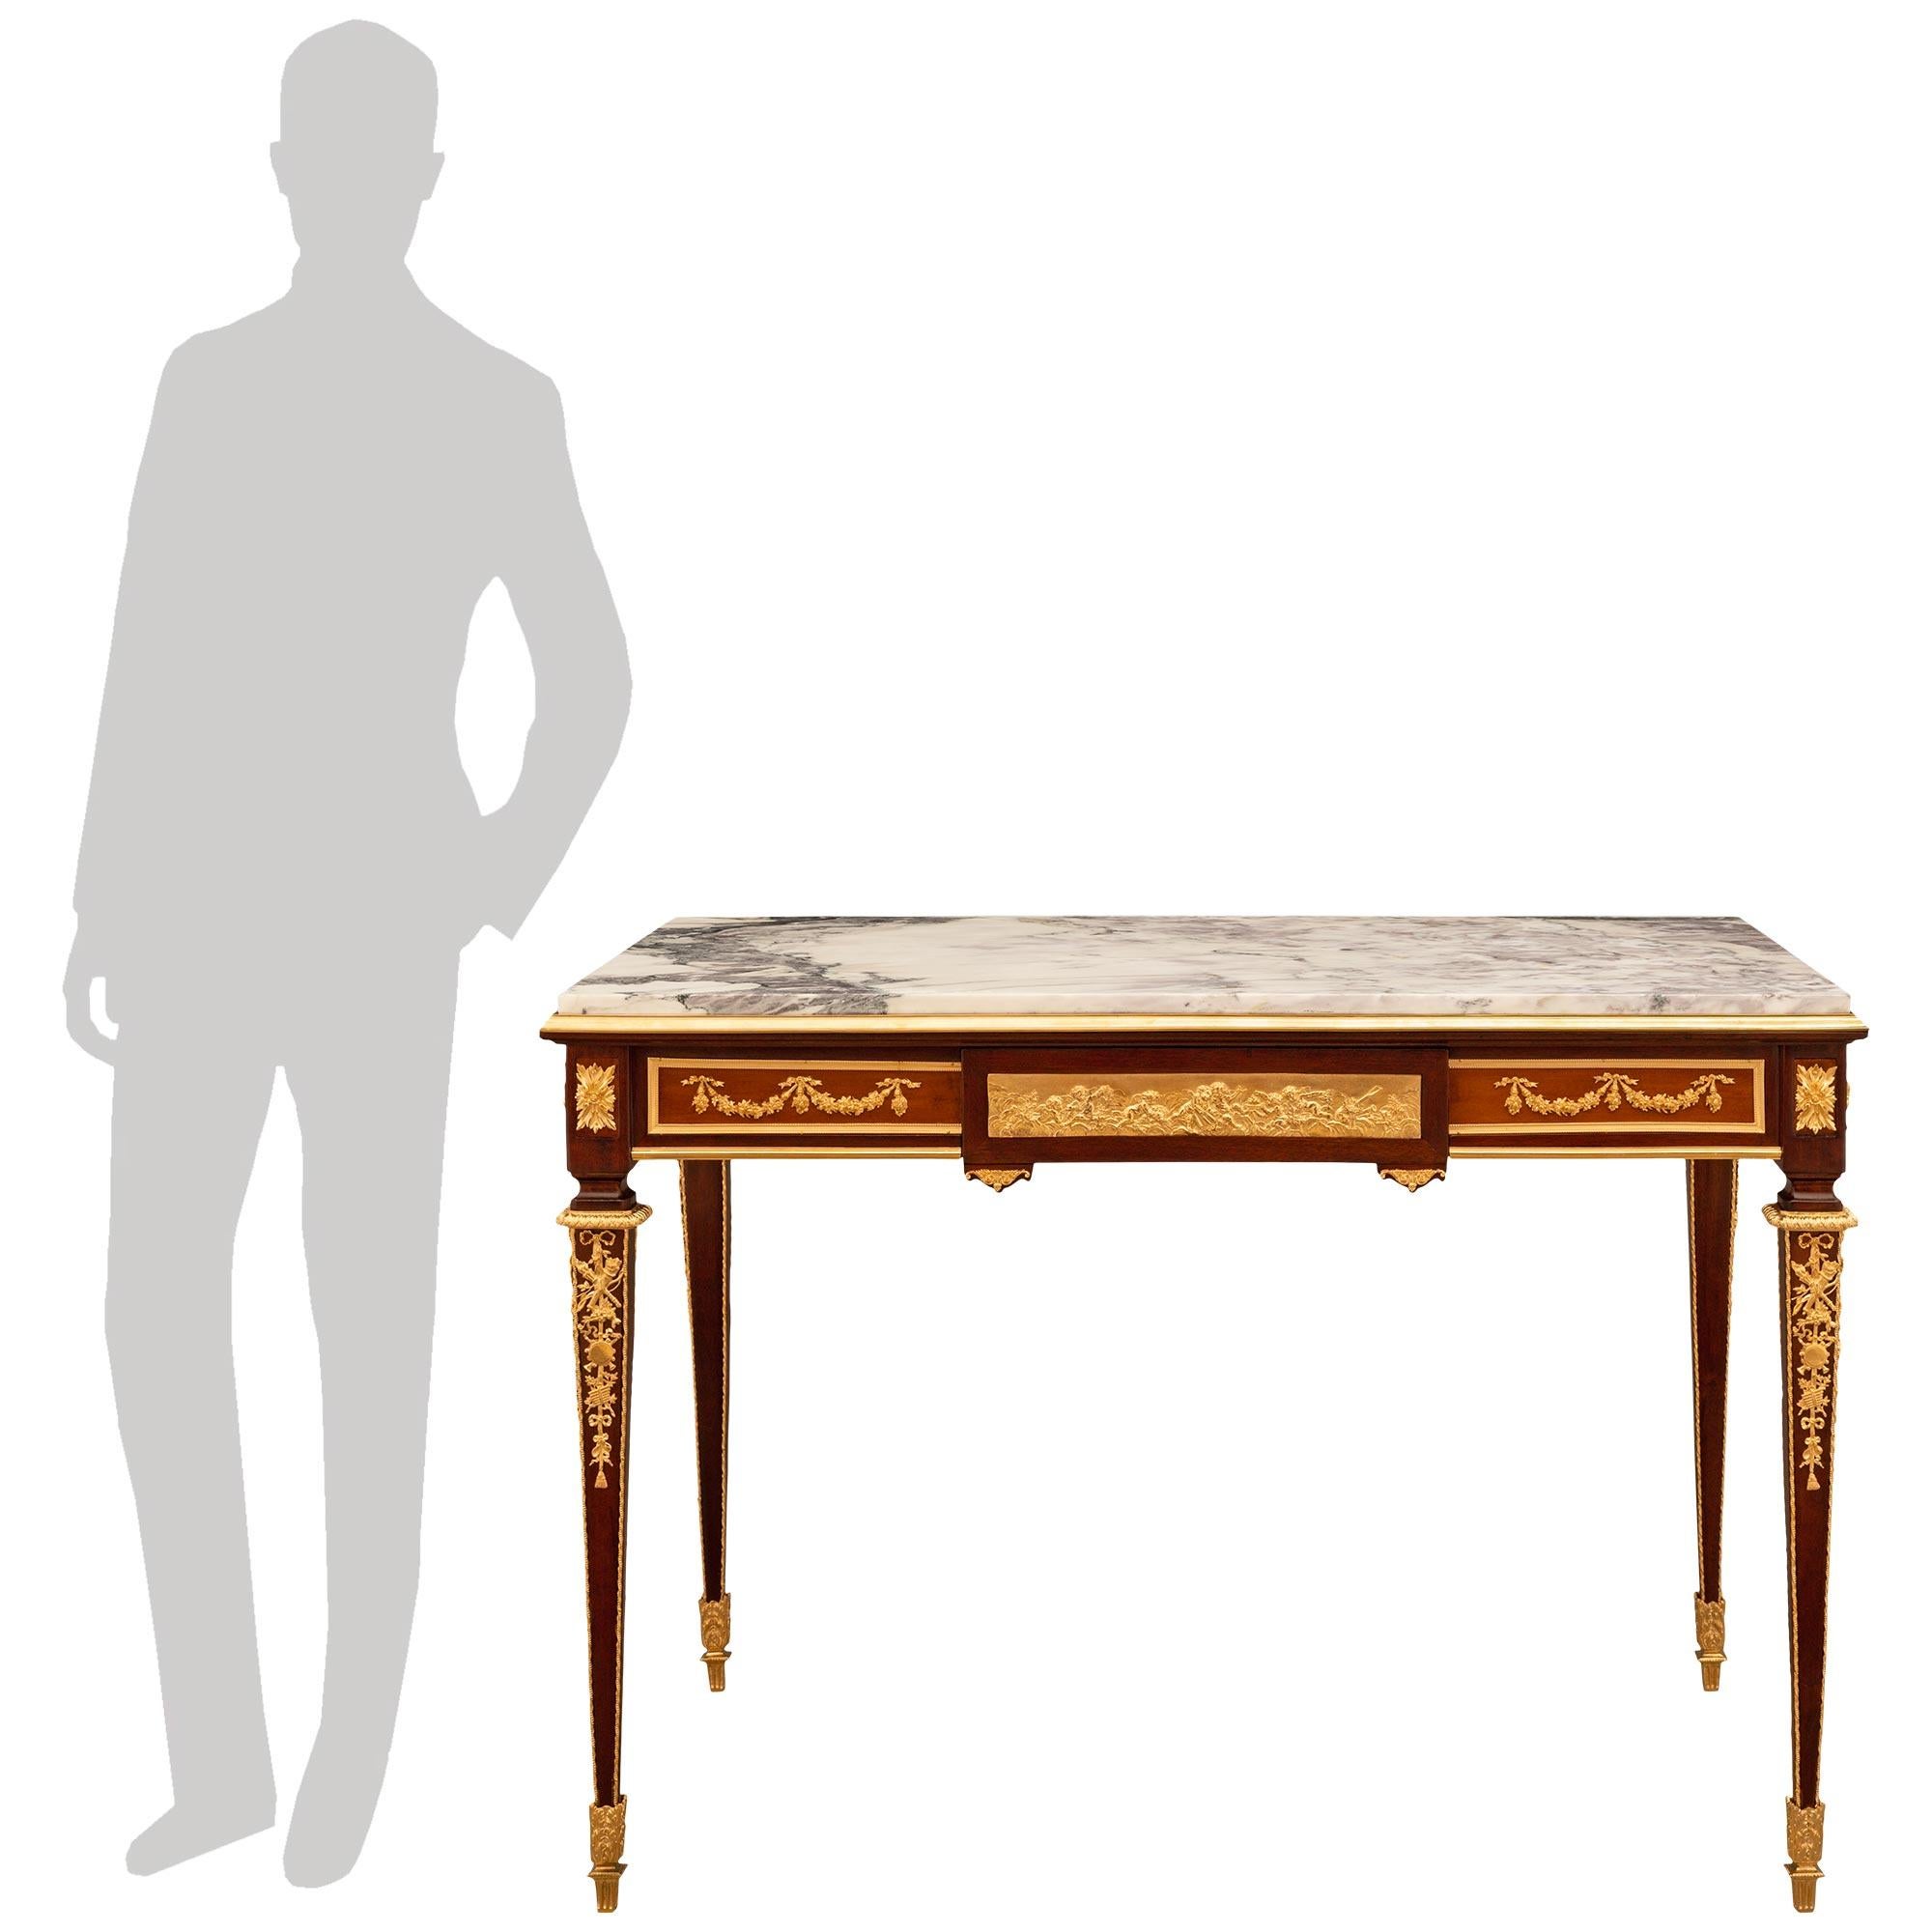 A stunning and high quality French 19th century Louis XVI st. Belle Époque period Mahogany, Ormolu, and Rosalia marble center table/desk, attributed to François Linke. The desk is raised by elegant square tapered legs with beautiful fitted foliate